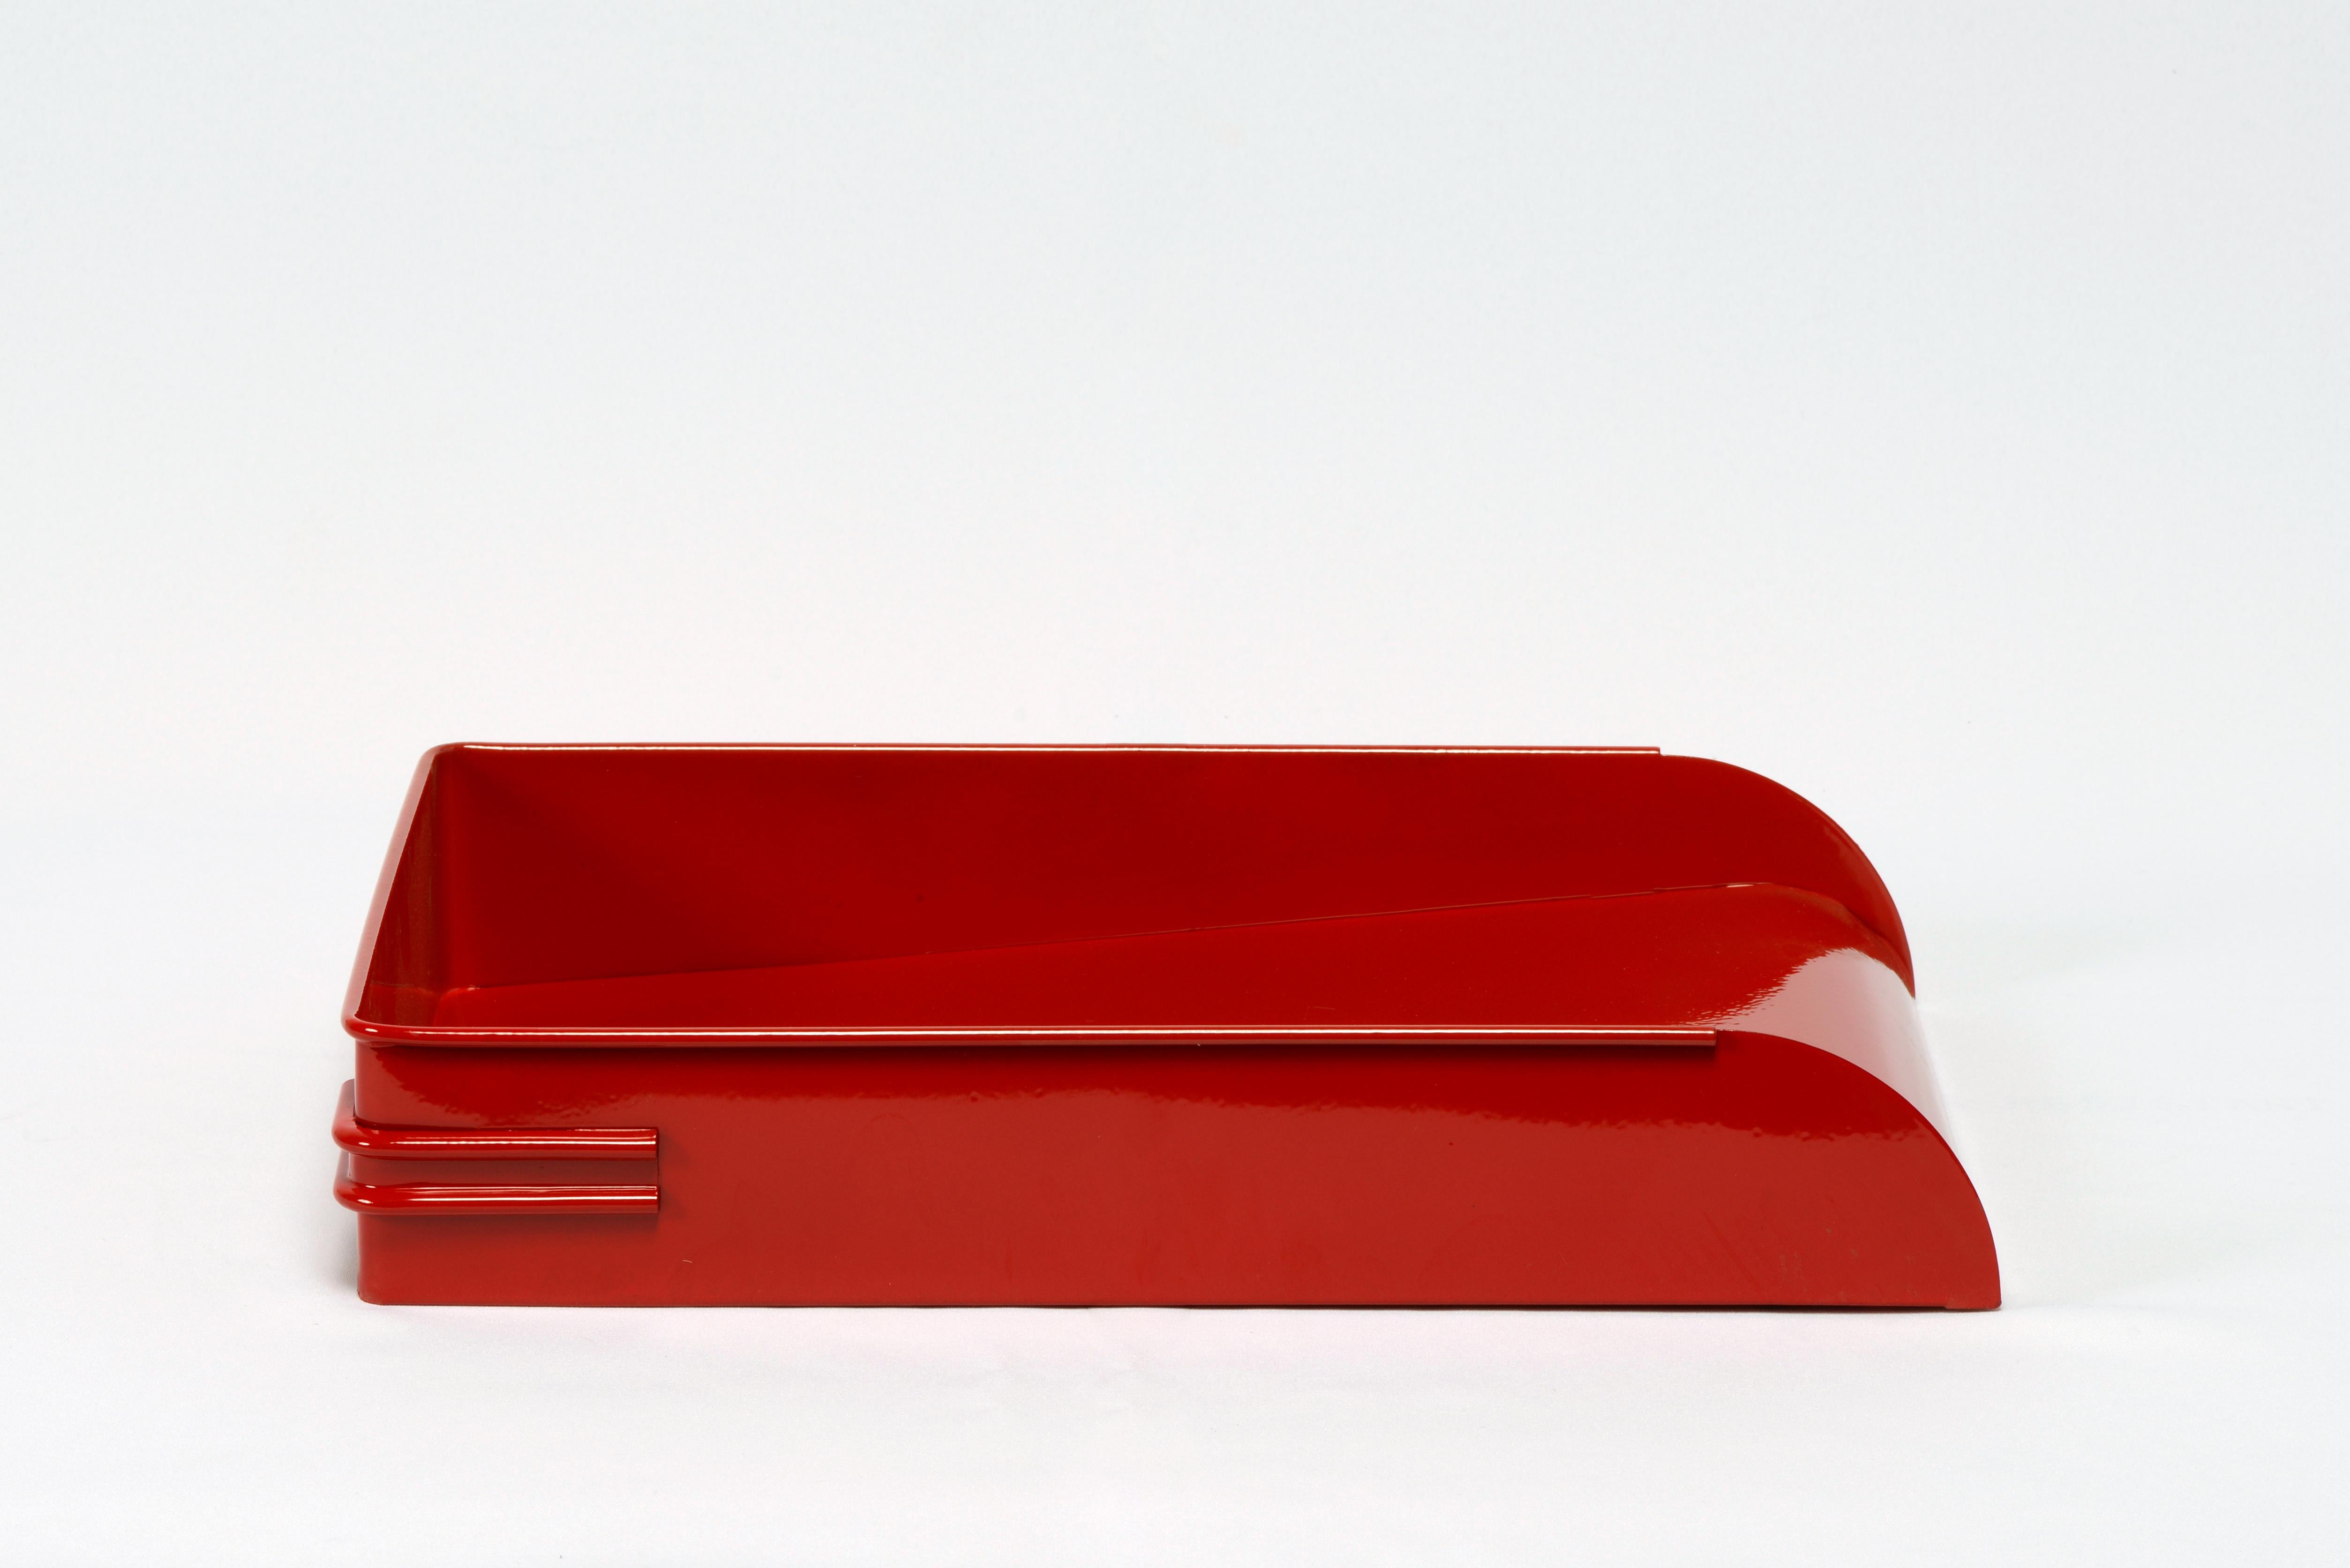 Powder-Coated 1930s Steel Letter Tray Refinished in Gloss Red